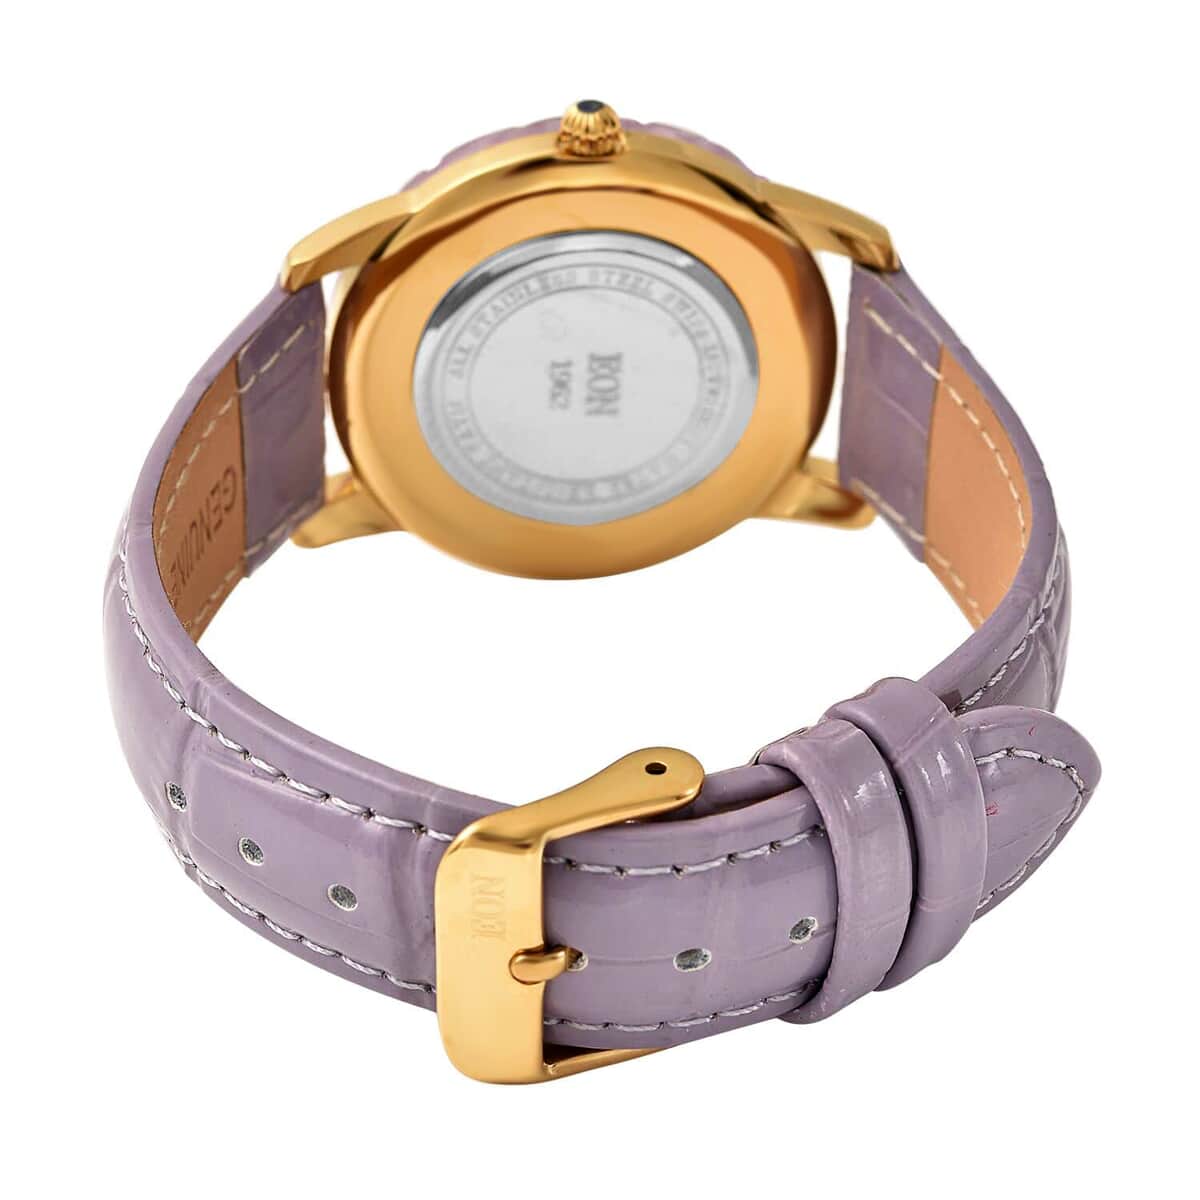 Eon 1962 Carved Purple Jade 17.65 ctw Swiss Movement Watch, White Topaz Accent Watch with Purple Leather Strap, Casual Bracelet Watch, Best Everyday Luxury Minimal Women's Watch, Analogue Watches 6.50-8.25 Inches image number 4